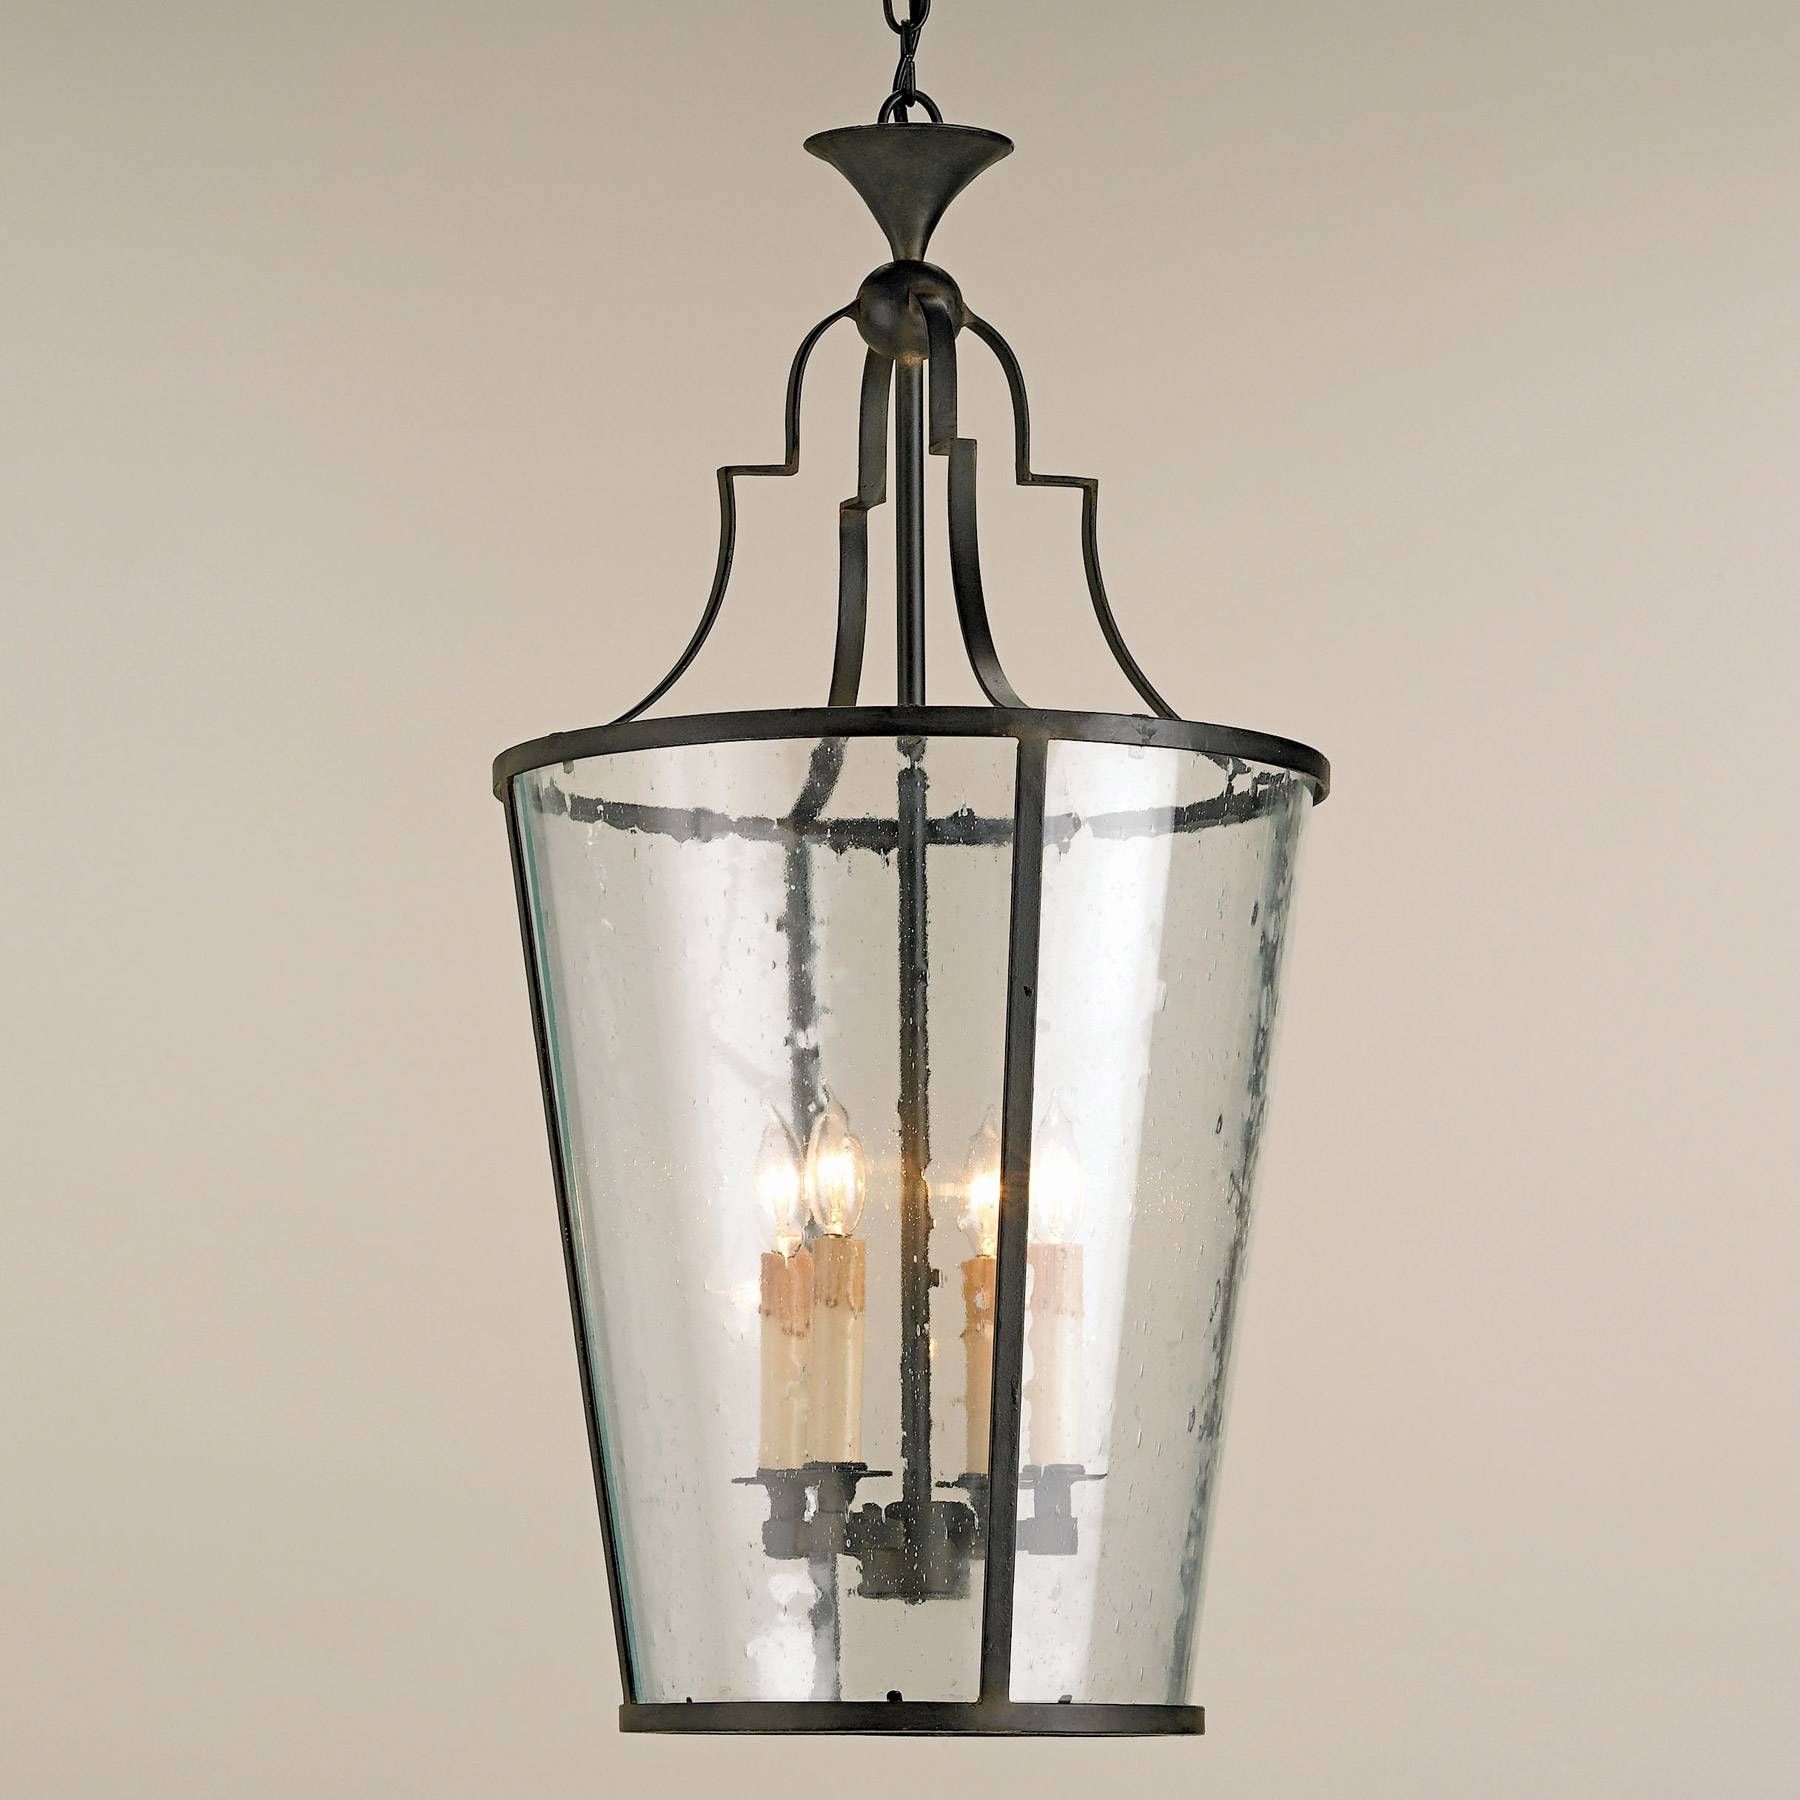 Traditional Entryway Light Fixtures : Selection Of Entryway Light Throughout Pendant Lights For Entryway (View 13 of 15)